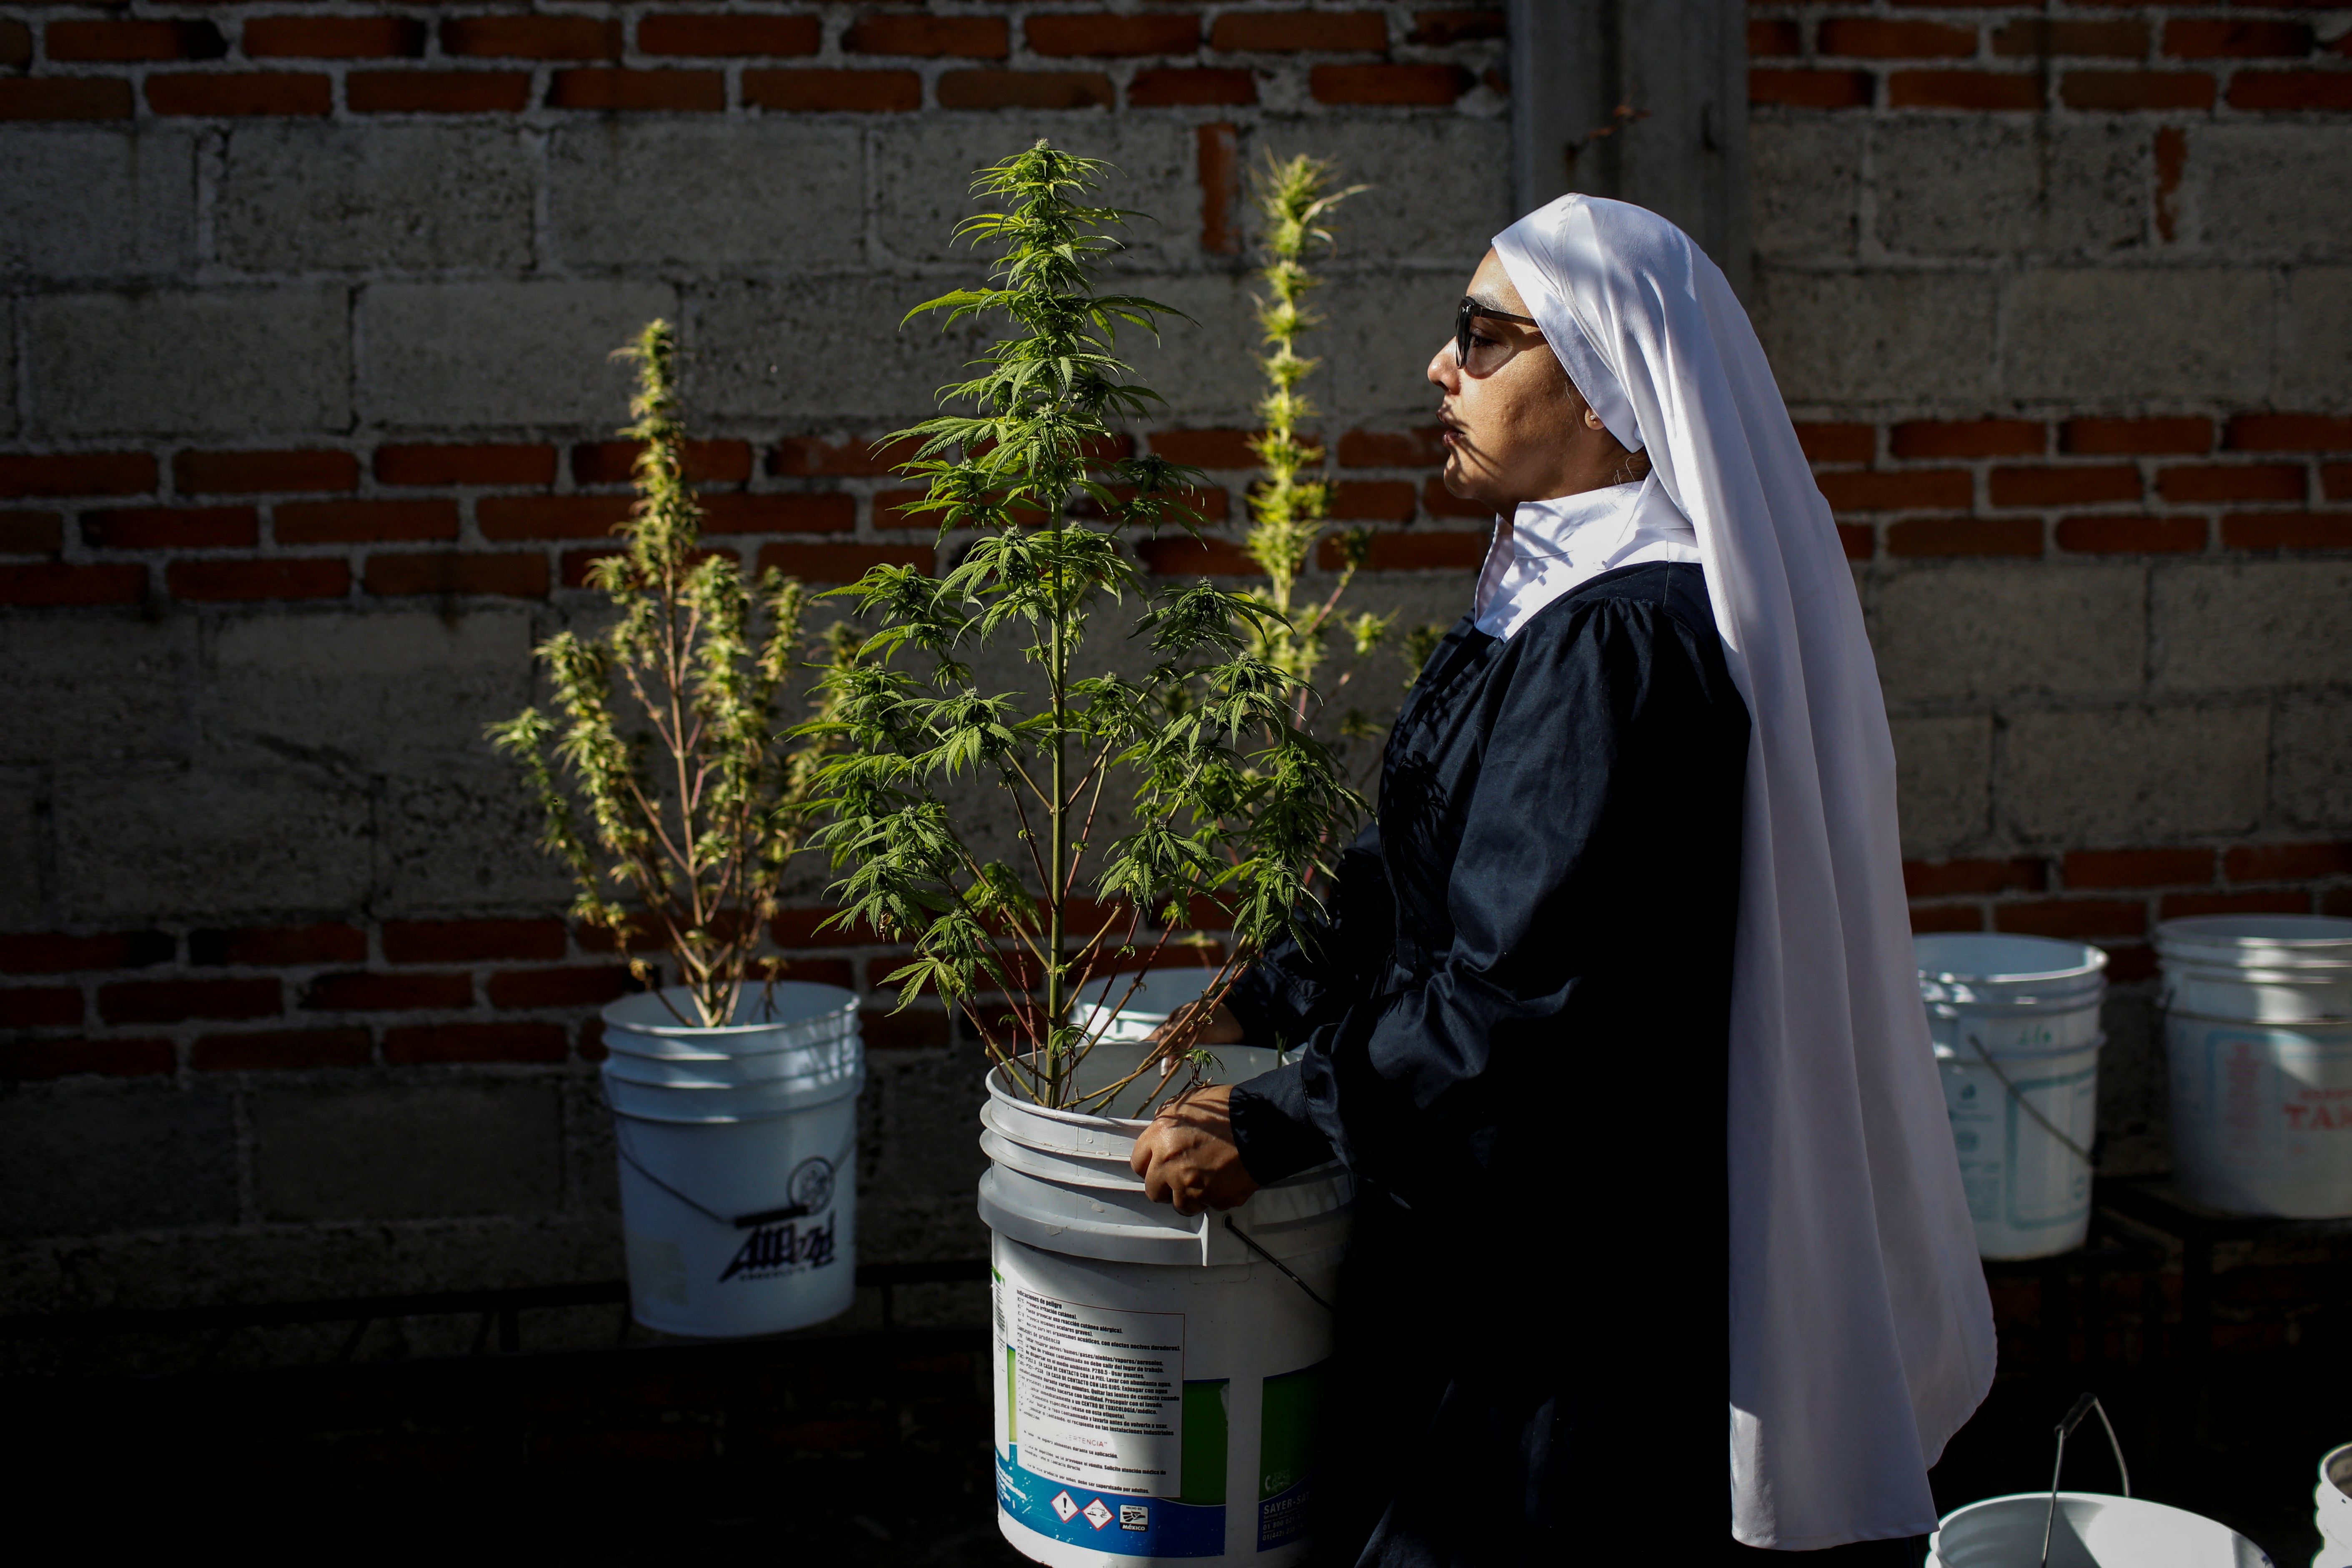 The nuns pot plants in old paint buckets and place them in rows between four unfinished concrete walls on a rooftop